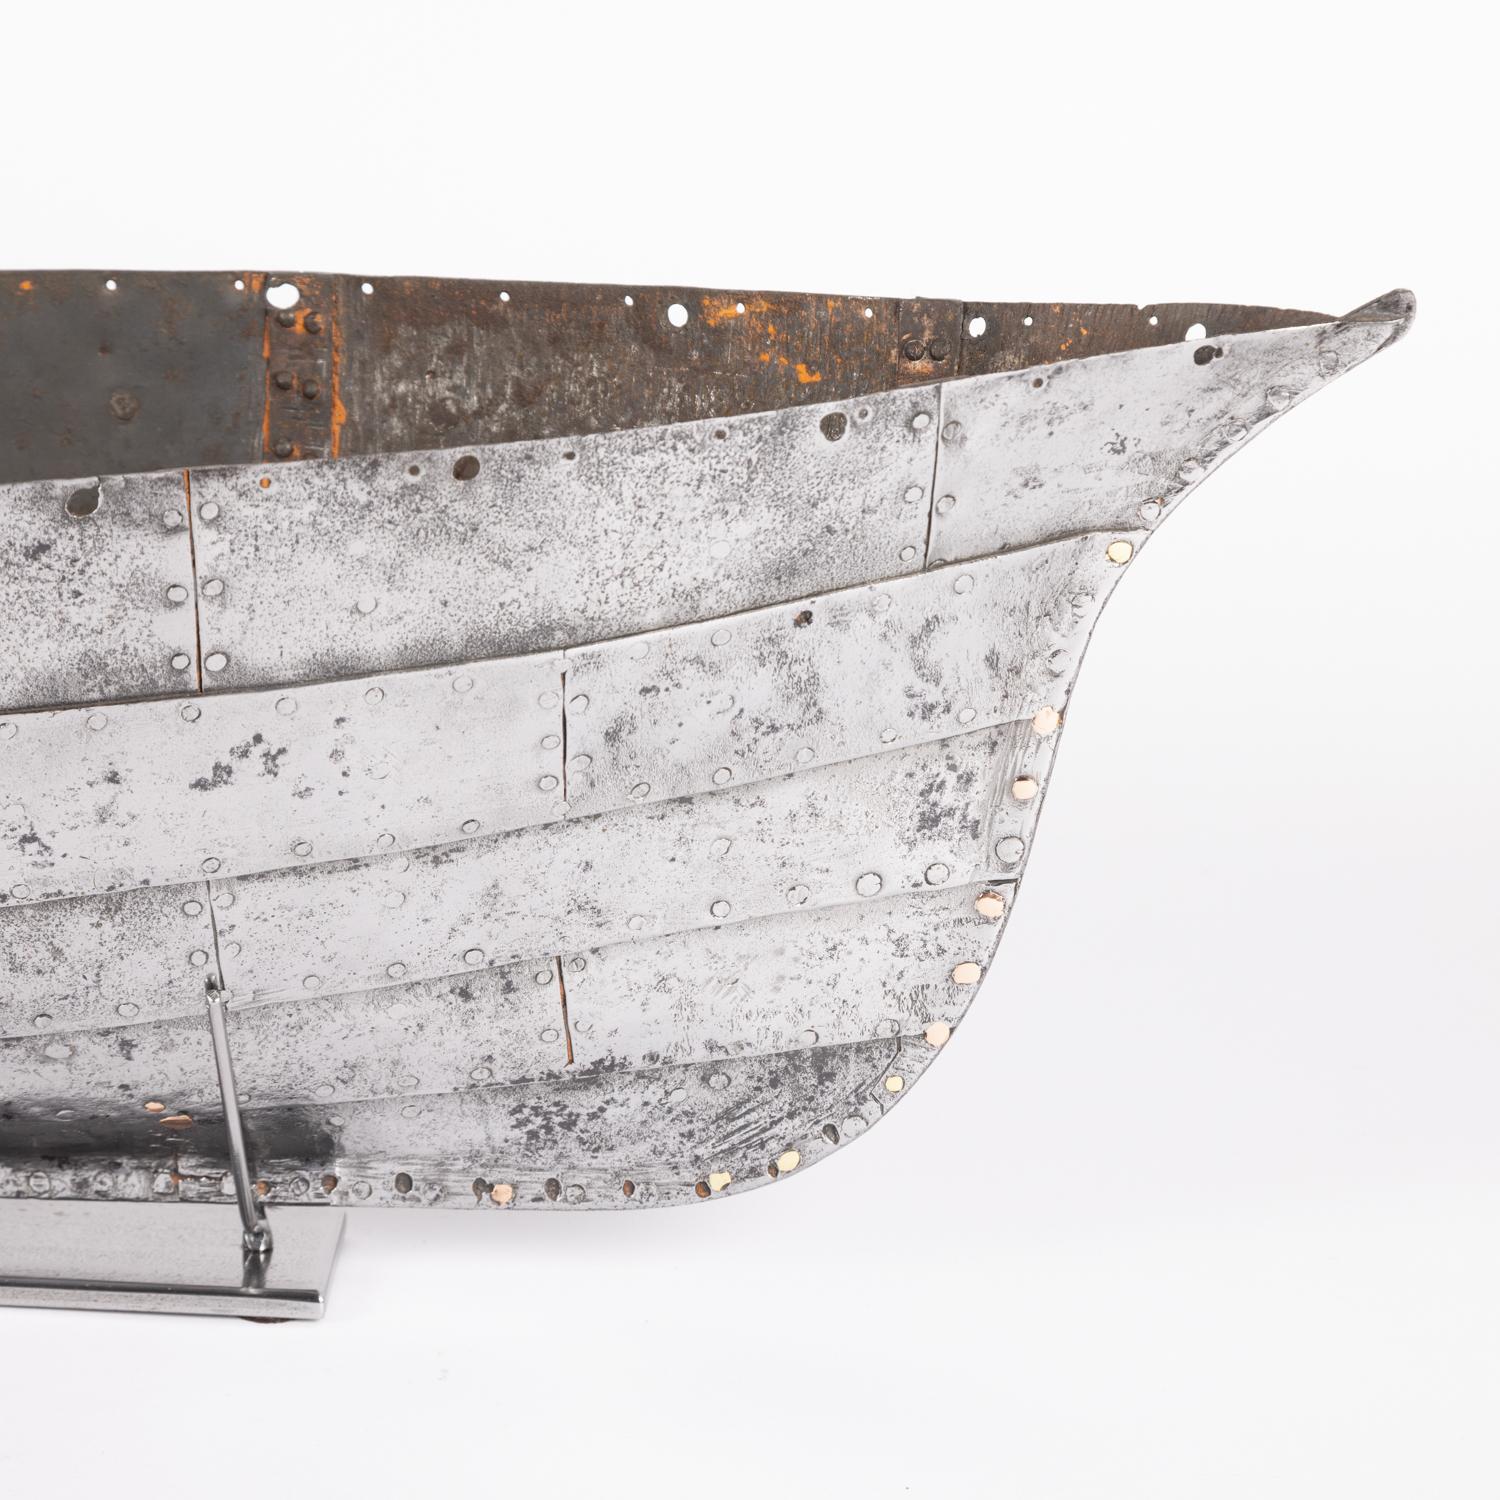 19th Century A mid 19th century riveted steel plate hull of a model steam yacht.